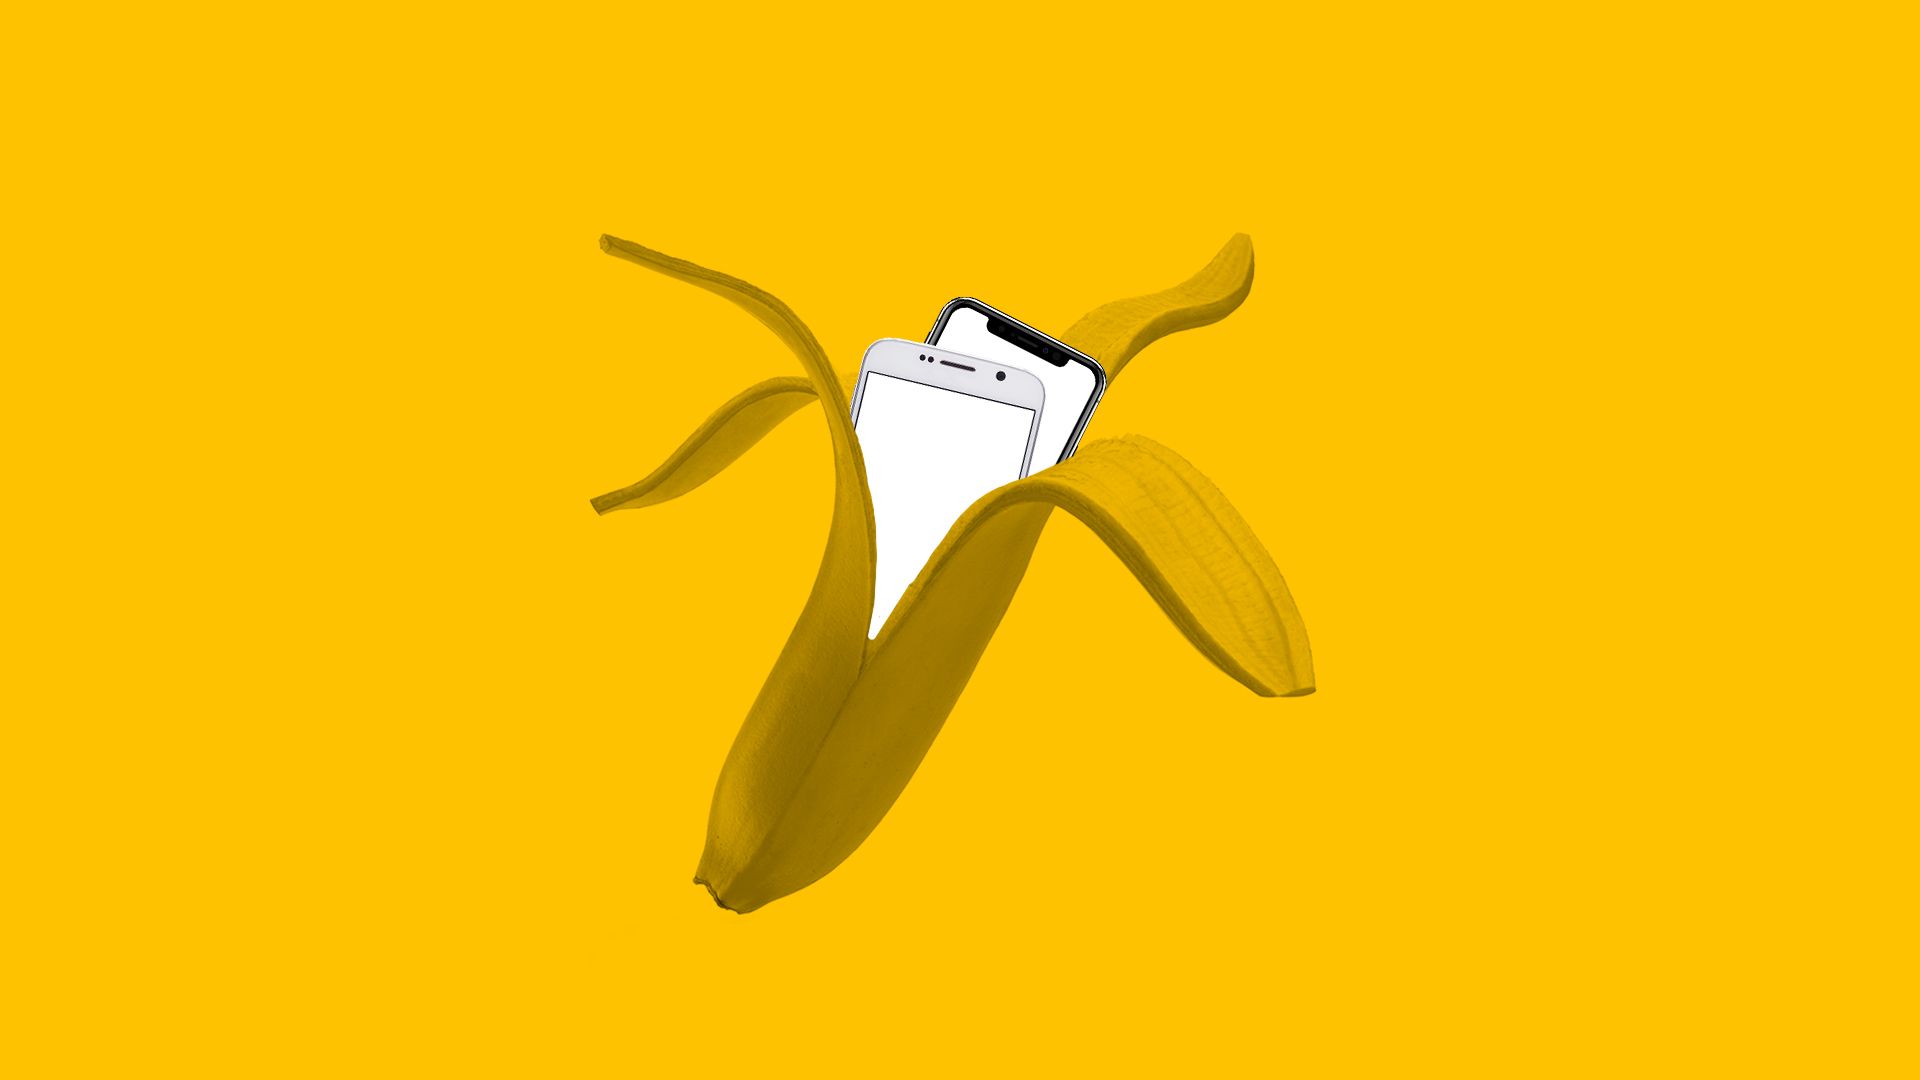 Illustration of a banana revealing two smartphones